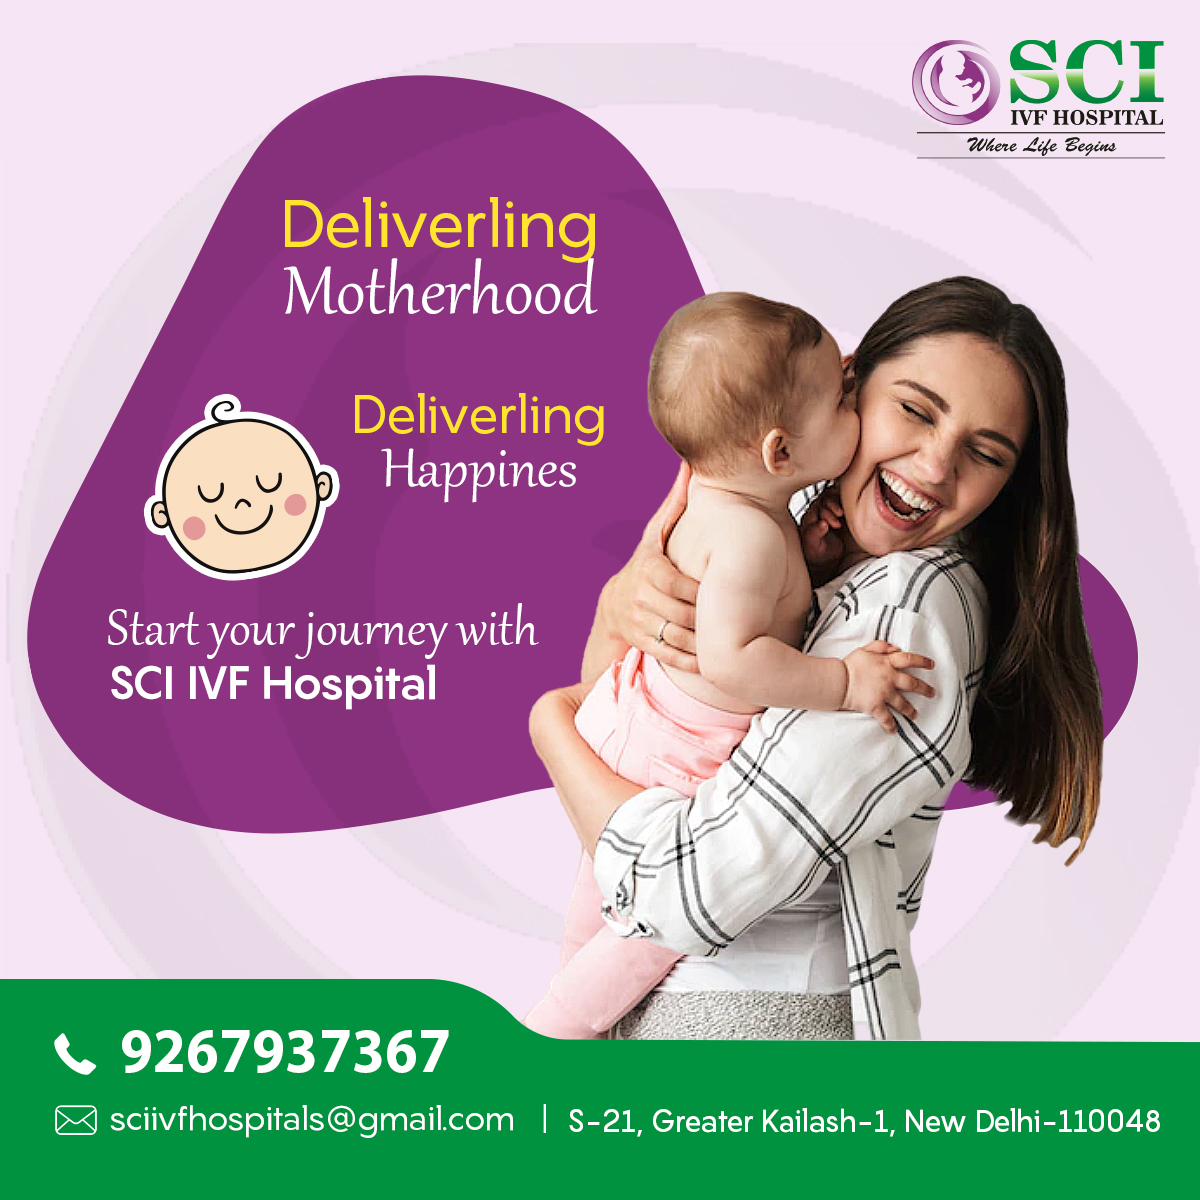 Delivering Motherhood, Delivering Happiness. Start your journey with SCI IVF Hospital.

Contact with our IVF experts to discuss about it.
✉ sciivfhospitals@gmail.com
📲 011-41022905/7/9, + 91 9267937367

#Motherhood #IVF #pregnancy #SCIIVFHospital #DrShivaniSachdevGour